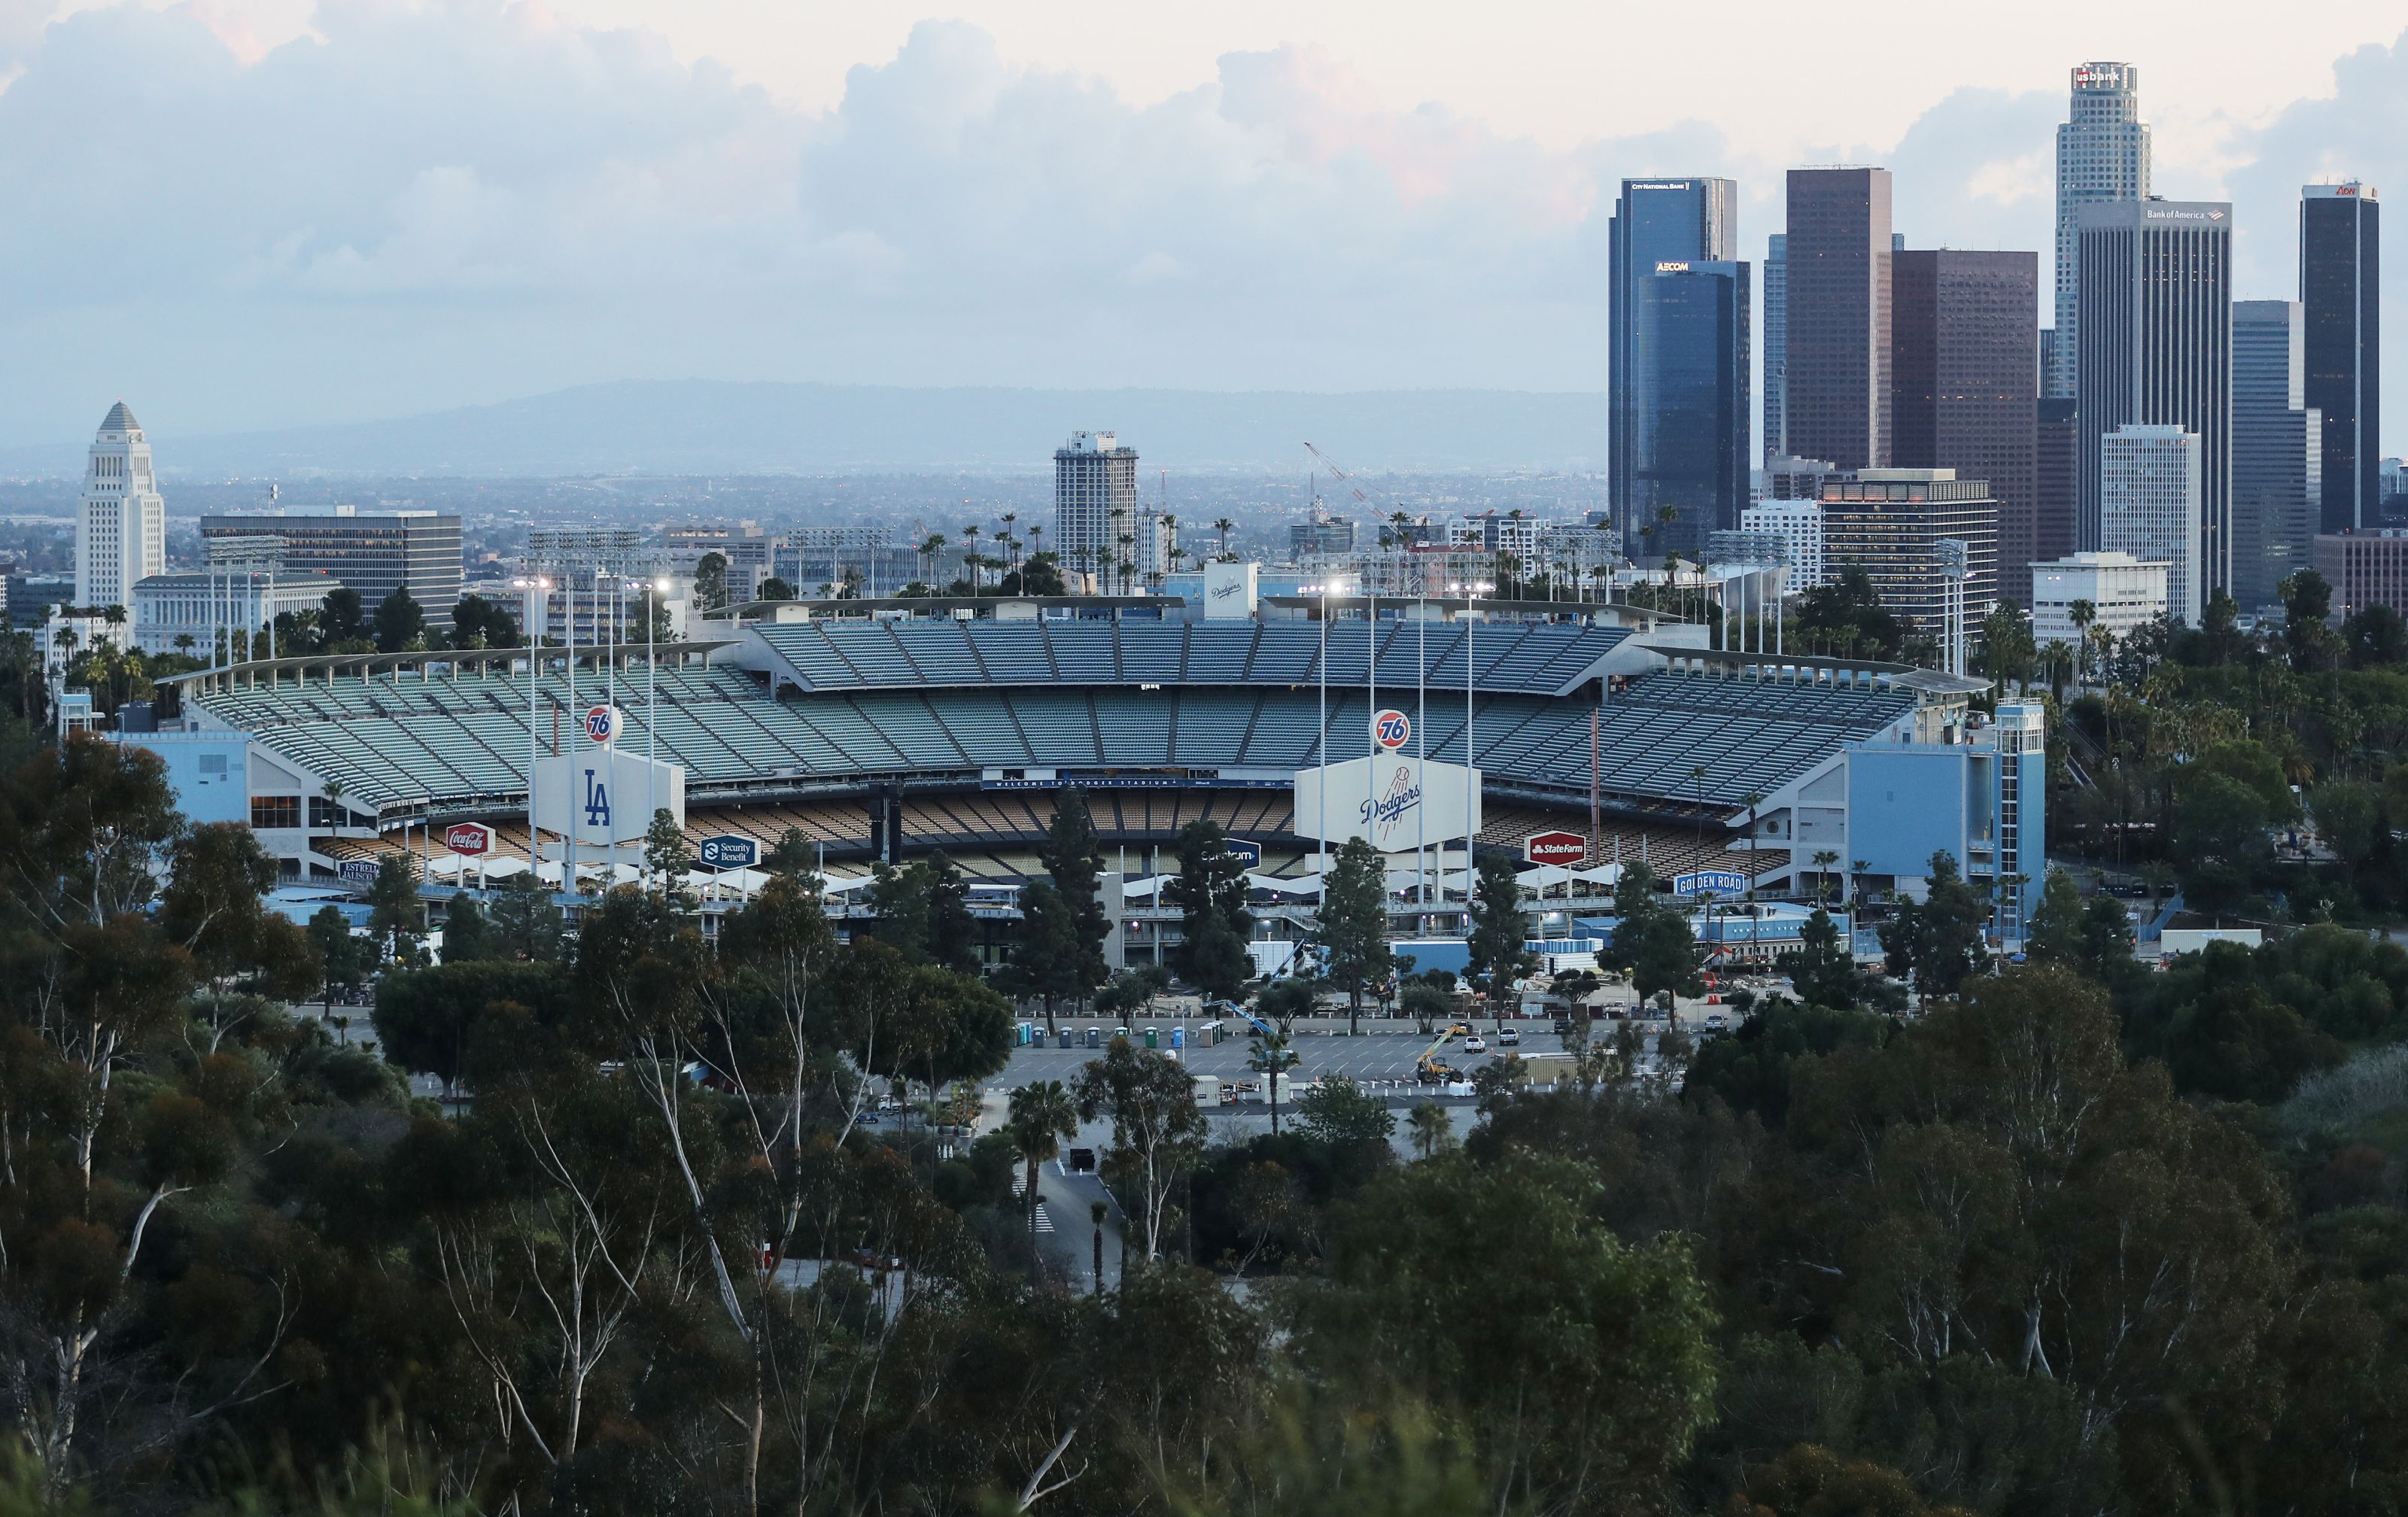 How to change your Zoom background to Dodgers Stadium